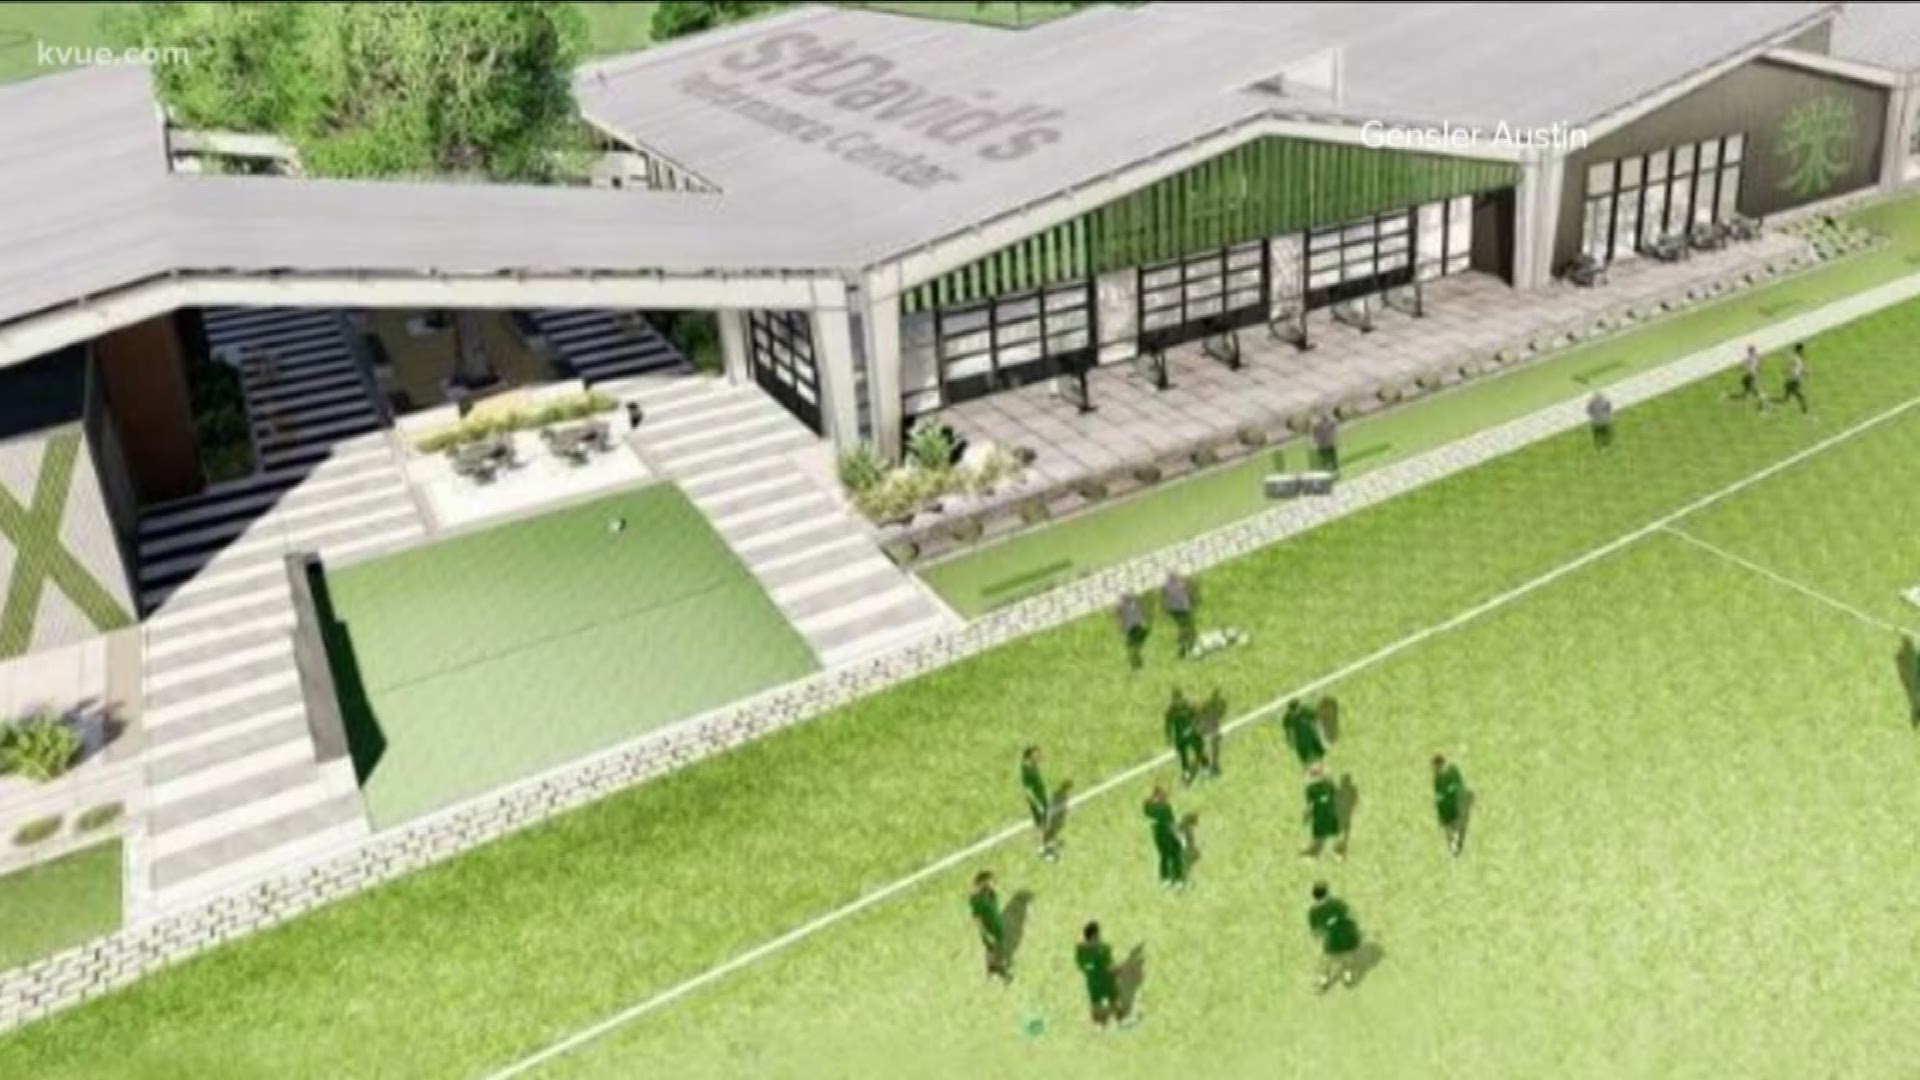 The facility will be on Parmer Ridge Dr. and Center Lake Dr. in northeast Austin.